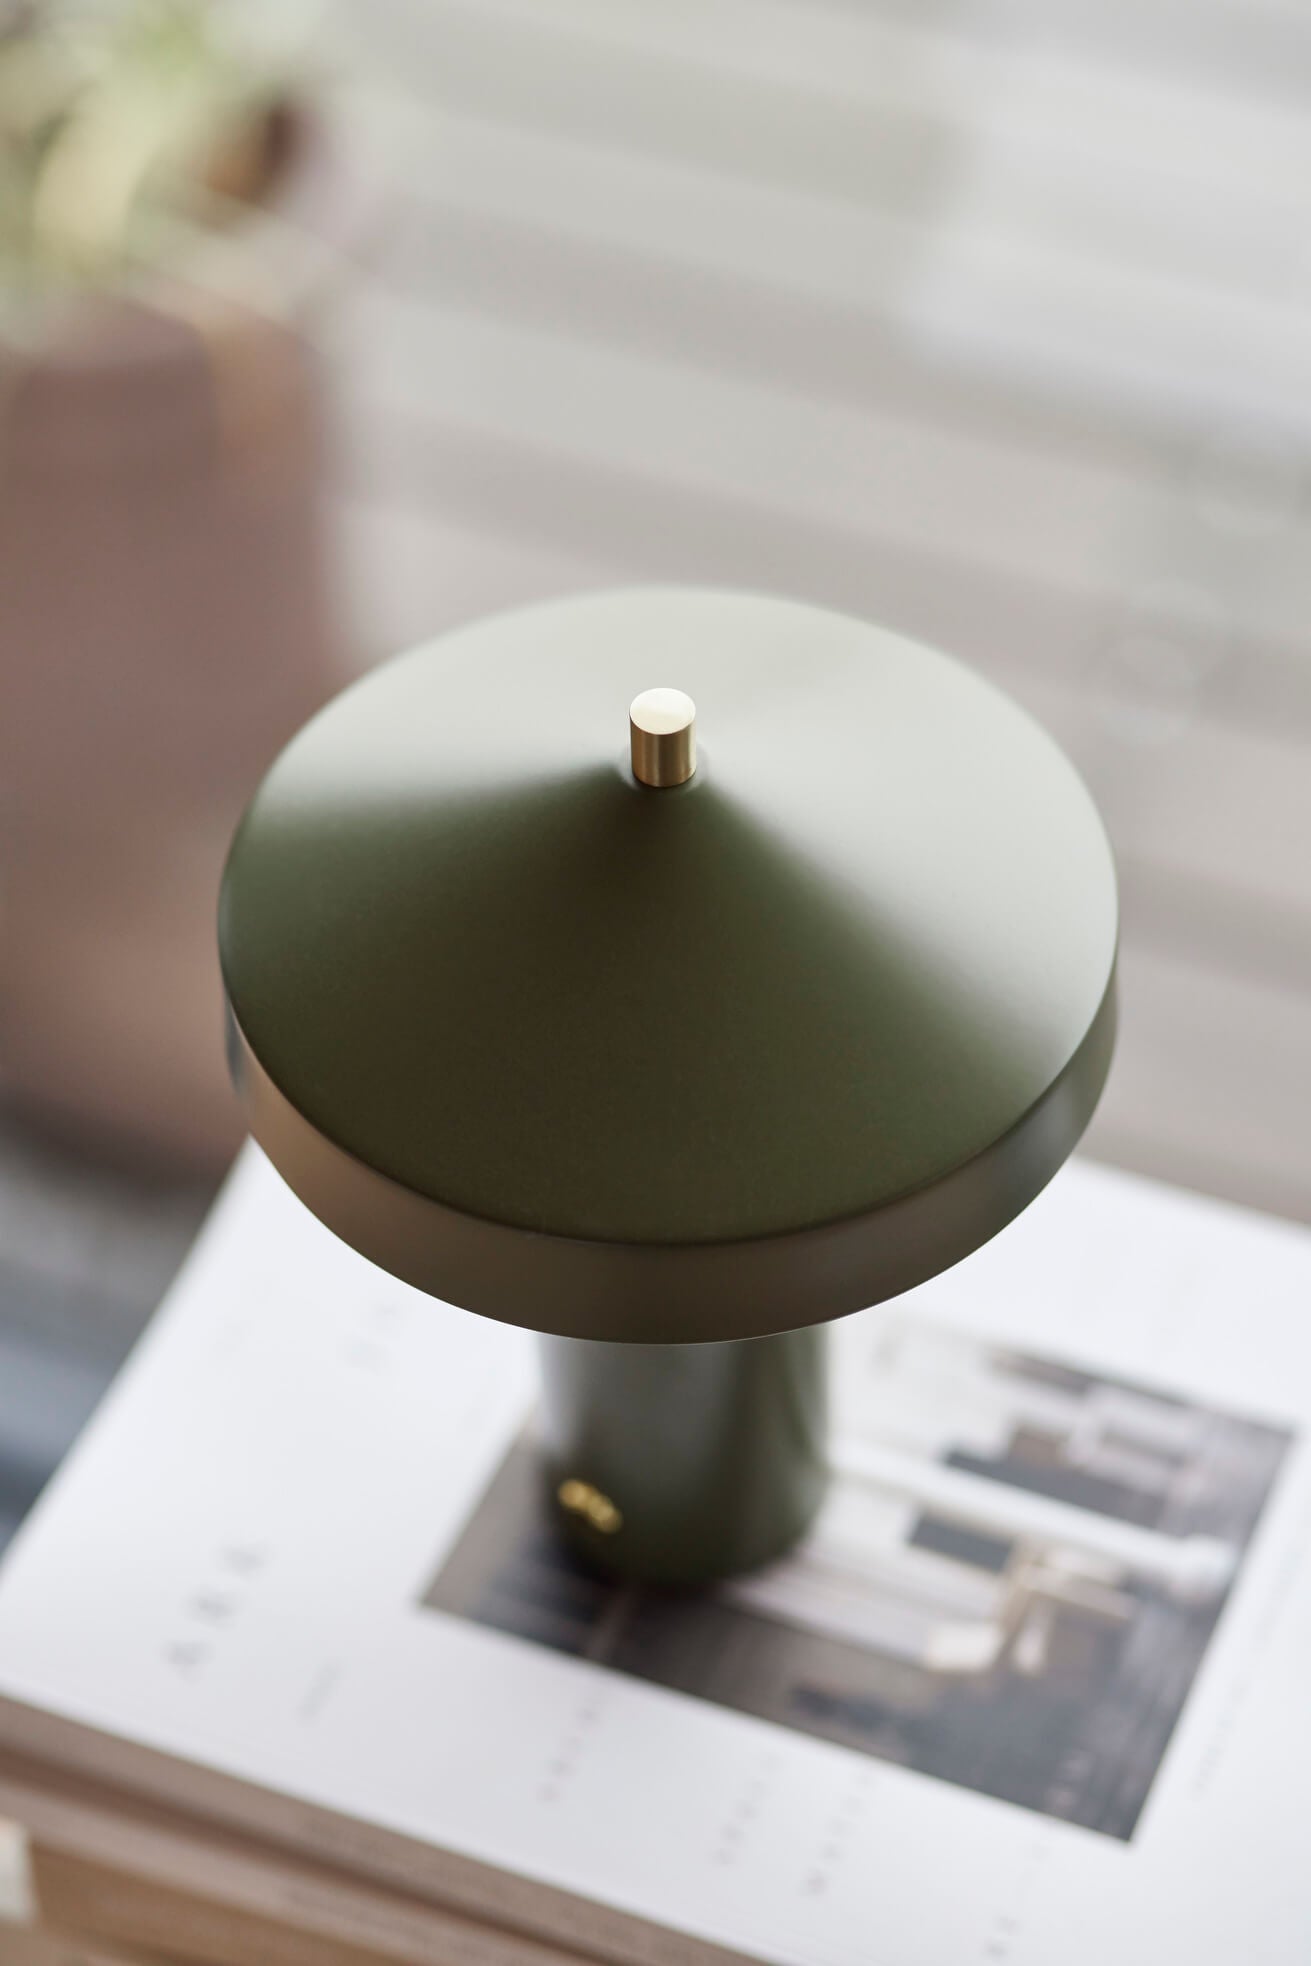 Indlæs billede i Gallery viewer, OYOY LIVING Hatto Table Lamp LED (EU) Table Lamp 706 Olive
